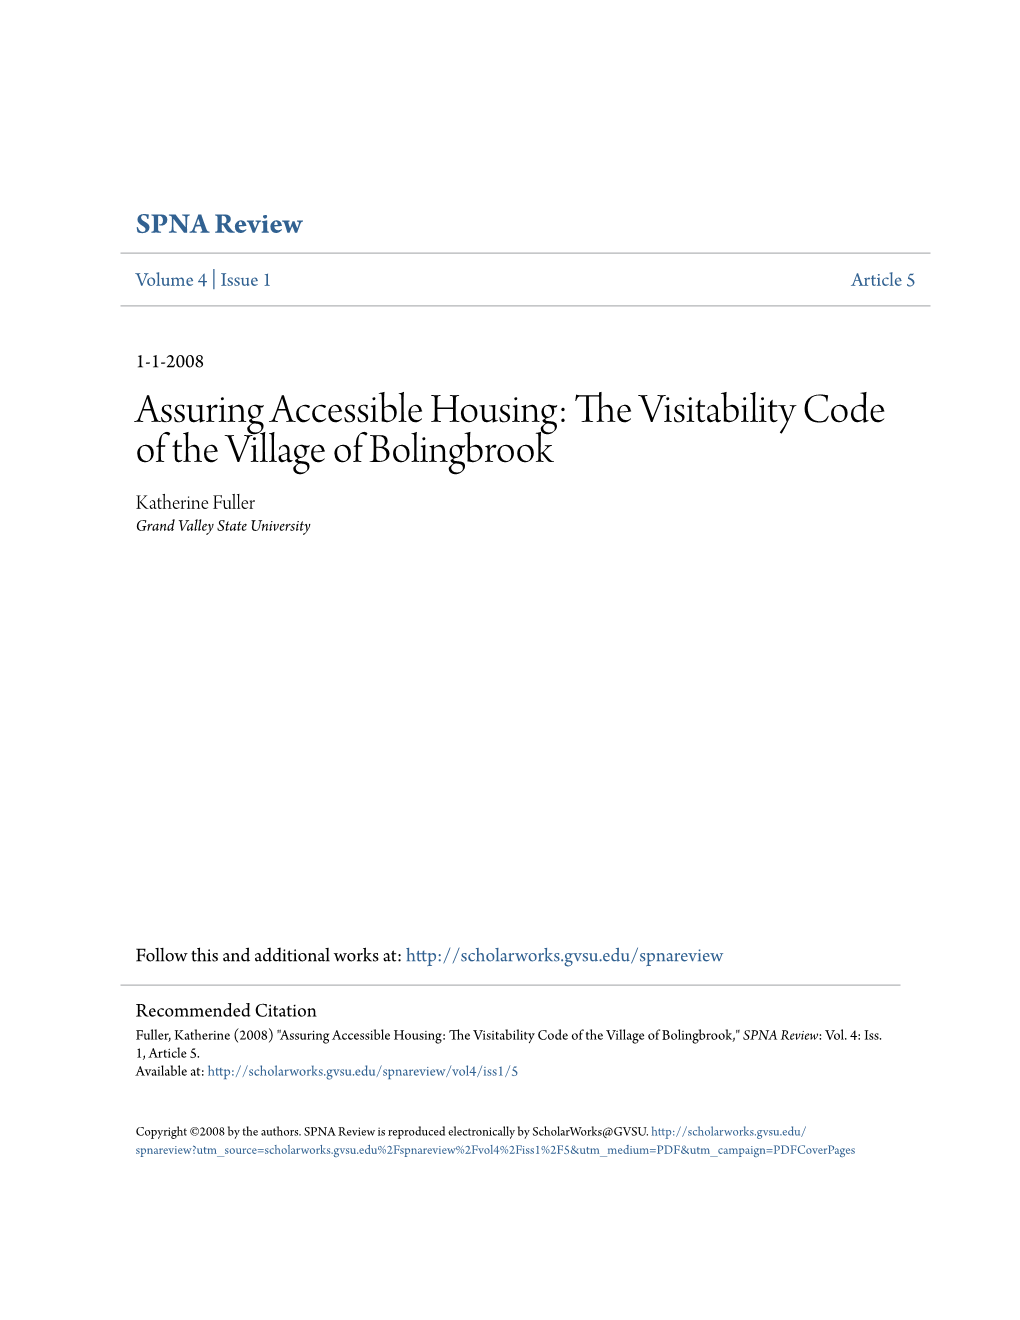 Assuring Accessible Housing: the Visitability Code of the Village of Bolingbrook